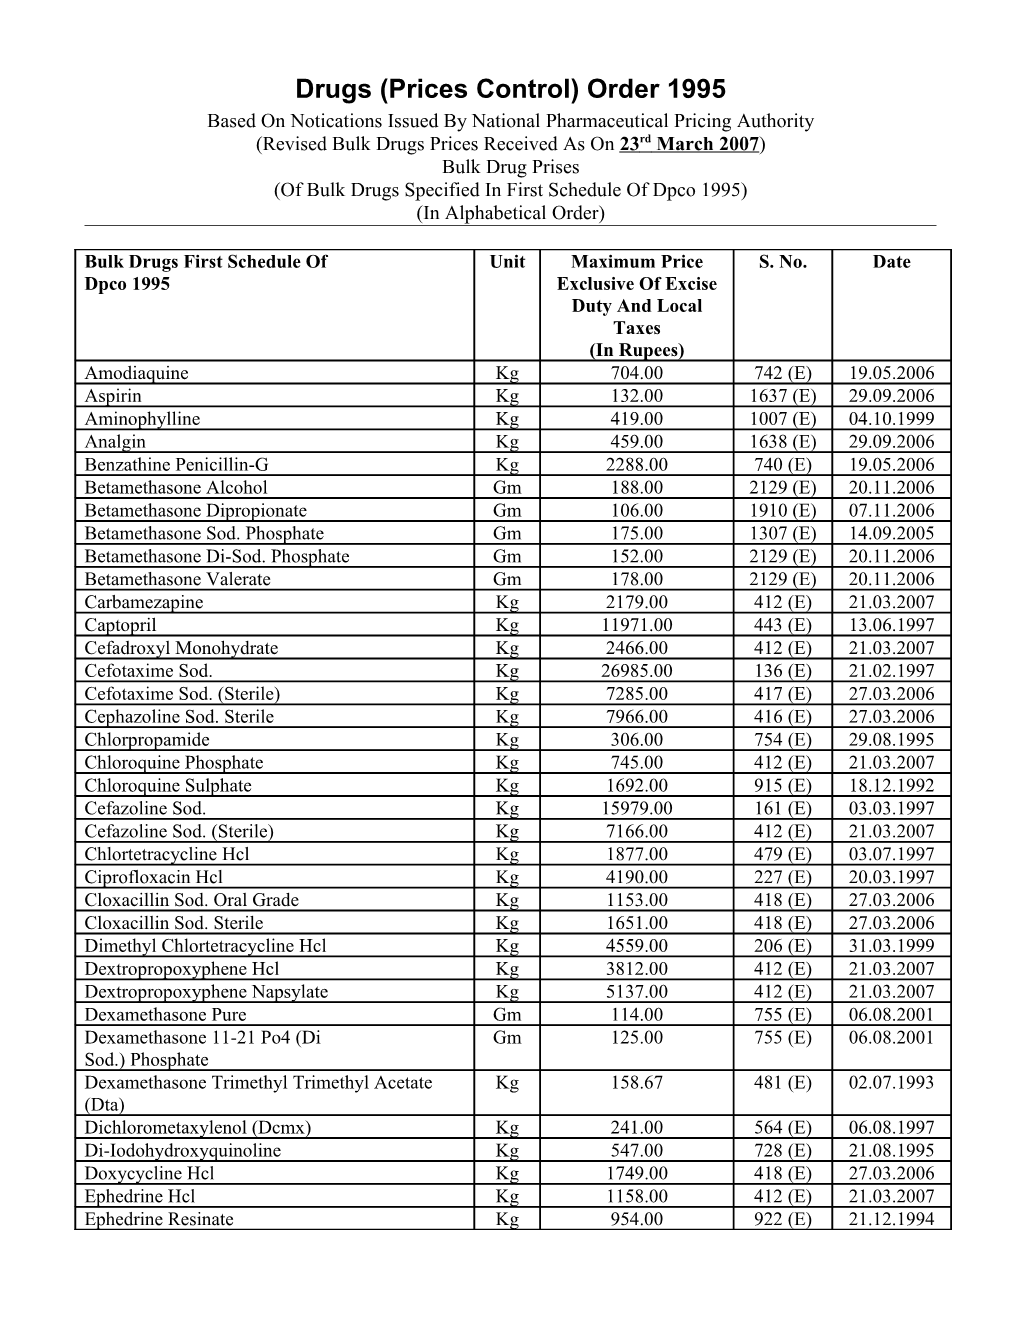 Drugs (Price Control) Order 1995 Prices Revision List of Bulk Drugs and Formulation